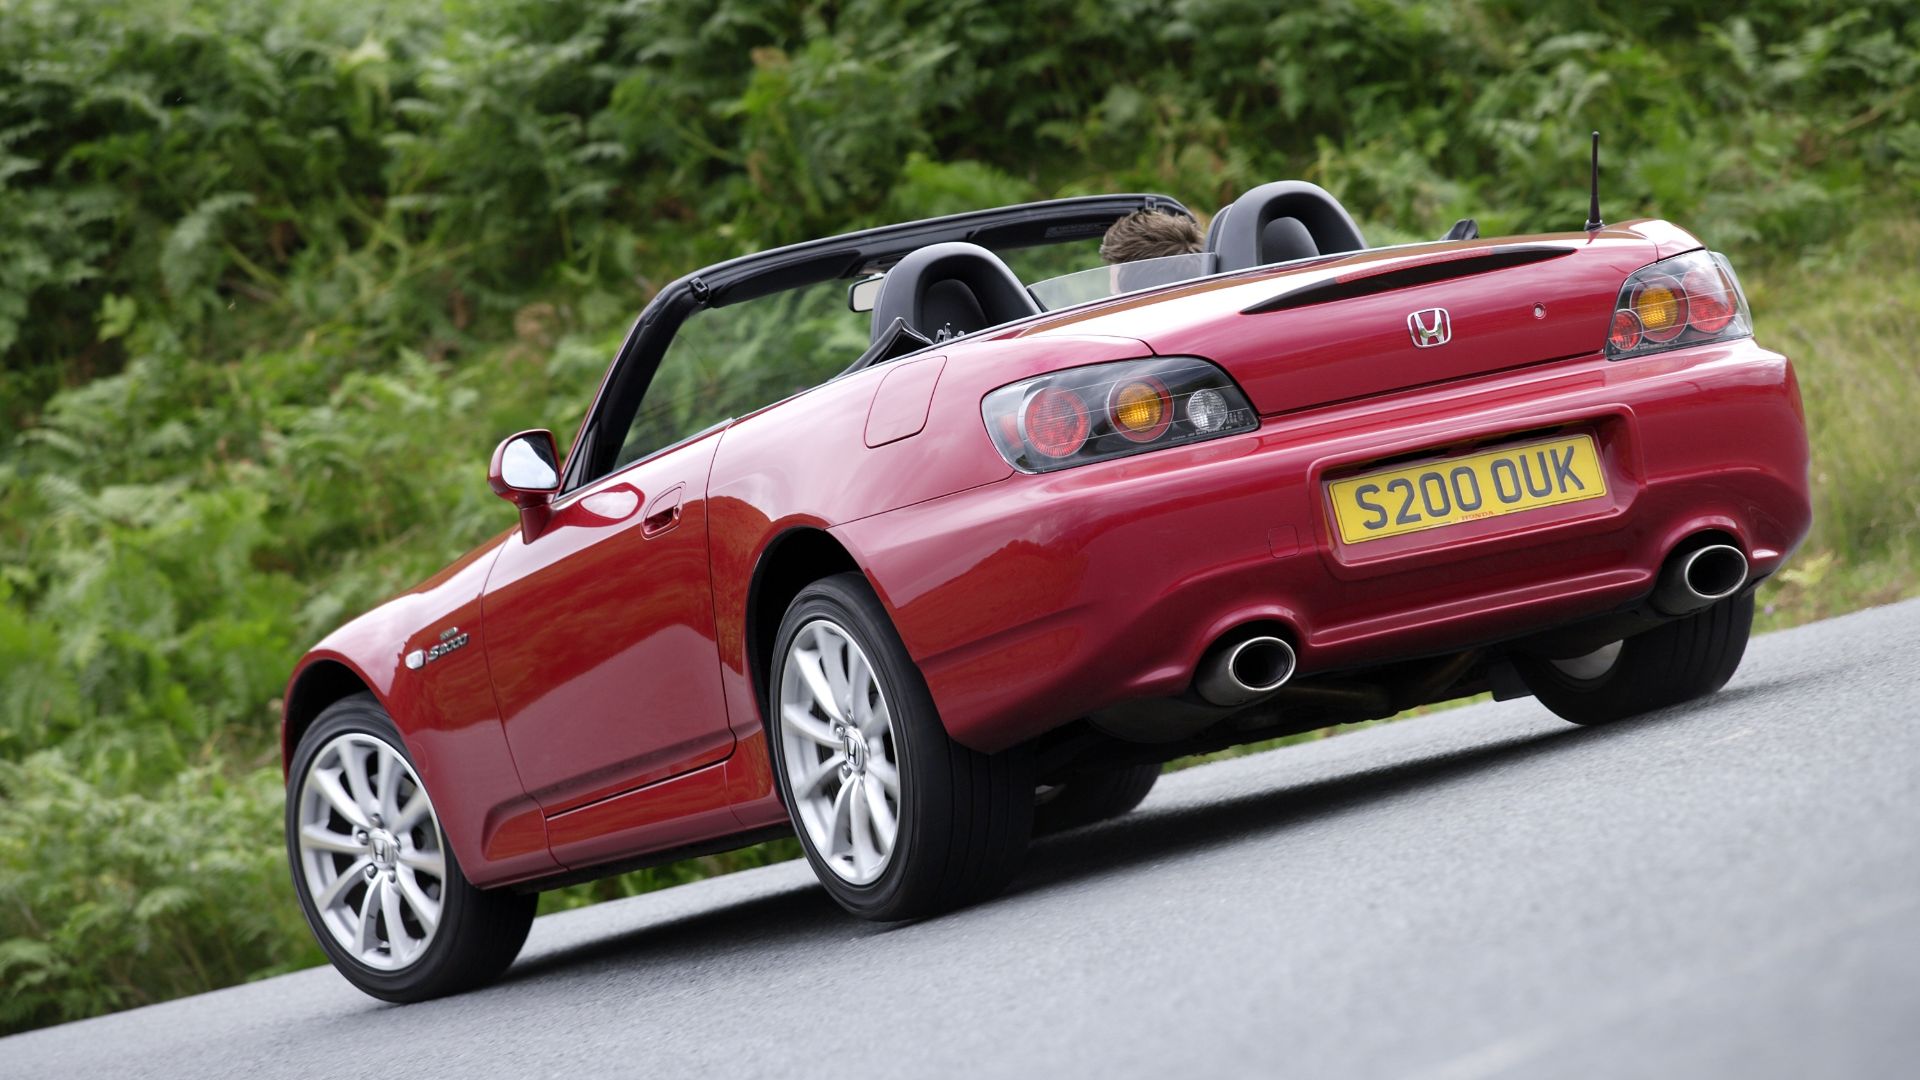 Honda to remanufacture S2000 parts